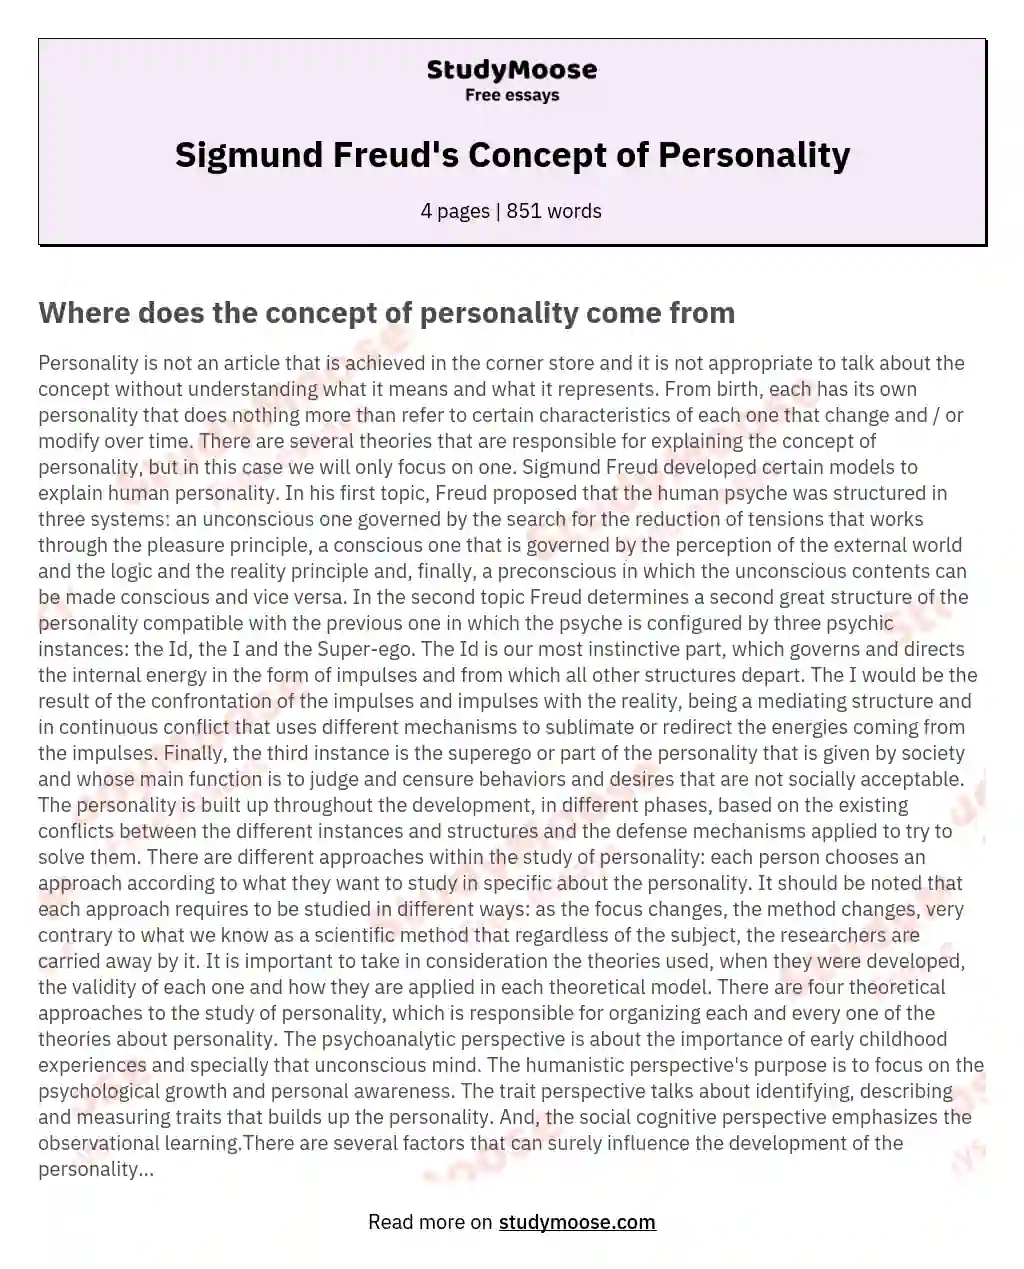 Sigmund Freud's Concept of Personality essay